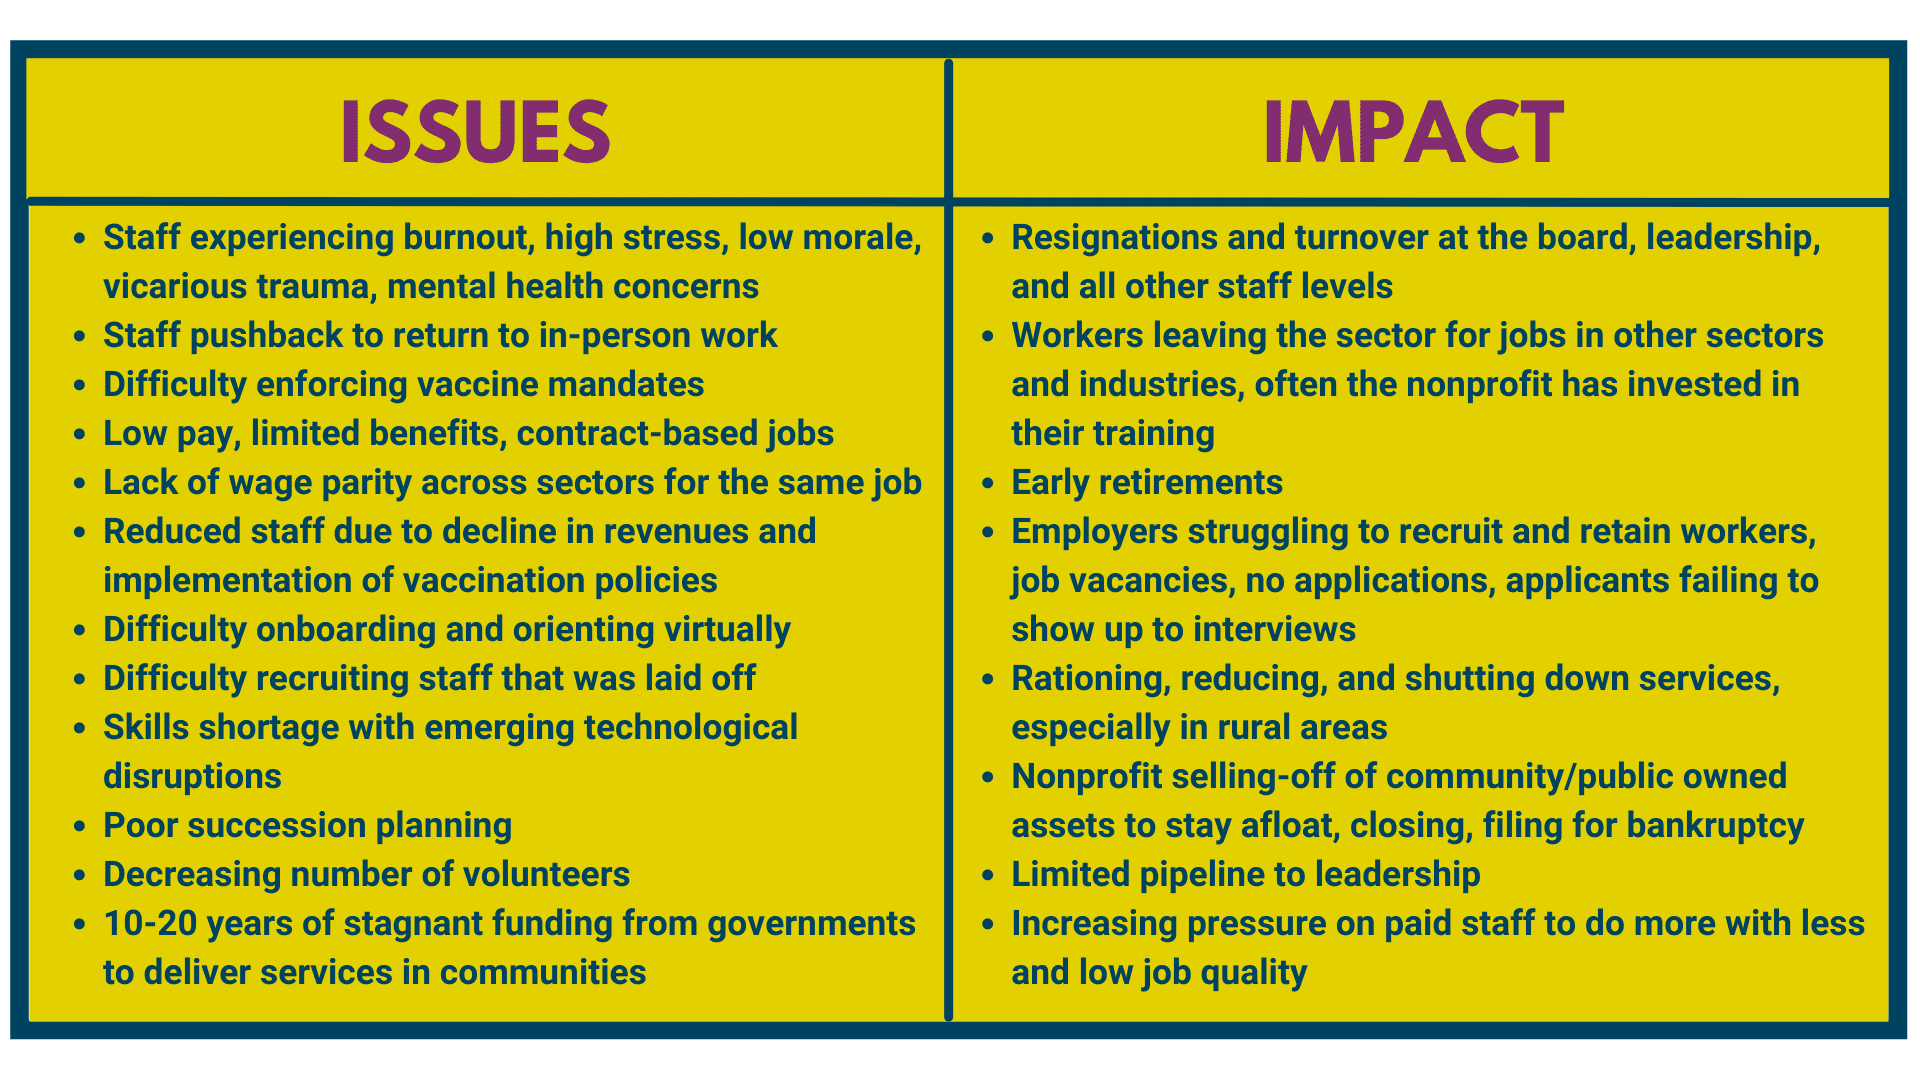 Table that shows bulleted list of issues on left and impact on right. Yellow background with purple headings and blue text.